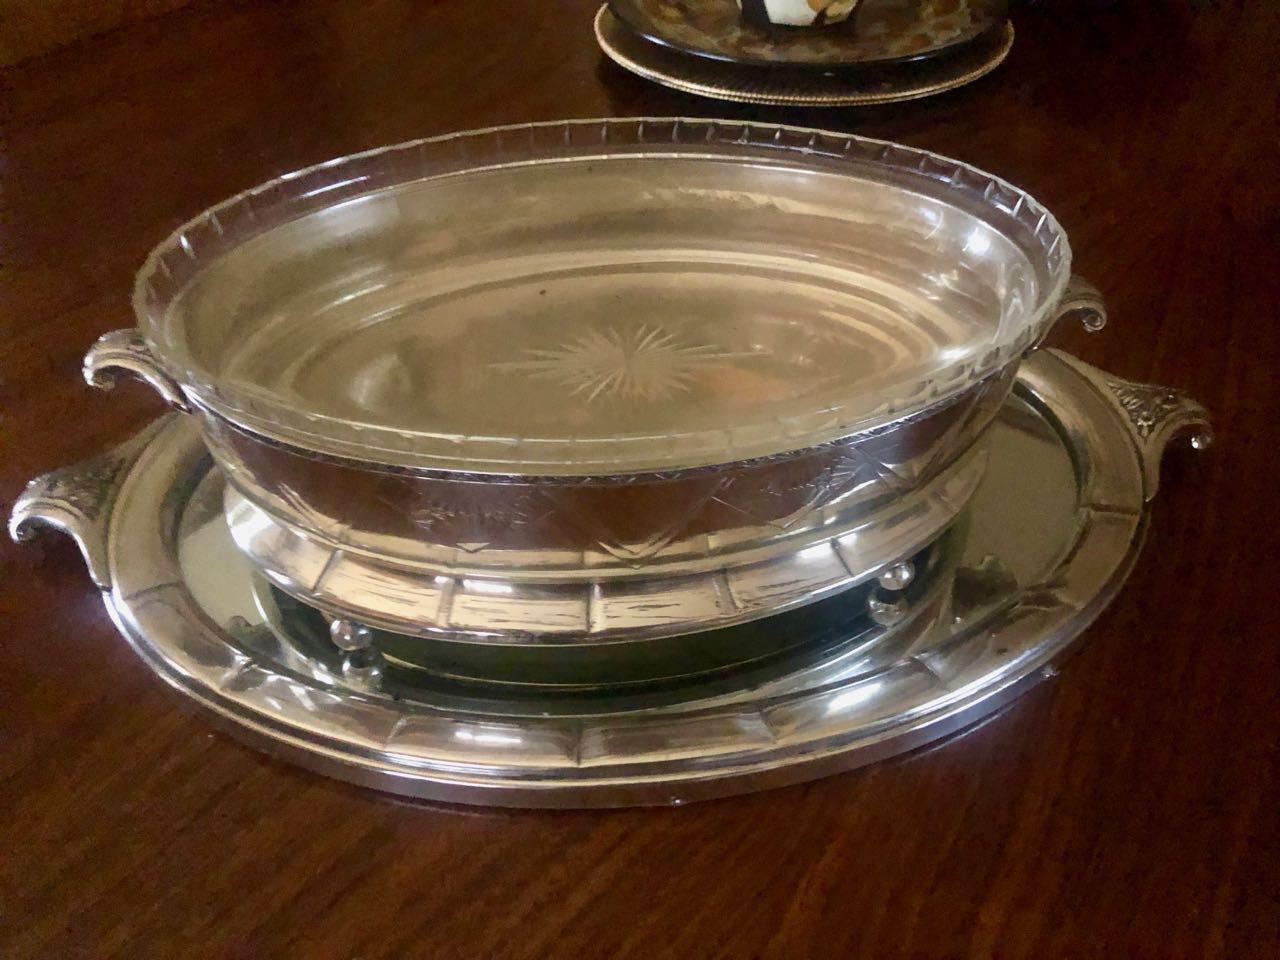 This Art Deco silver centerpiece has wonderful zig zag designs, a fluted glass insert with a starburst pattern and unique handles on the bowl and tray with geometric floral embellishments.

We have fallen in love with these early 20th century